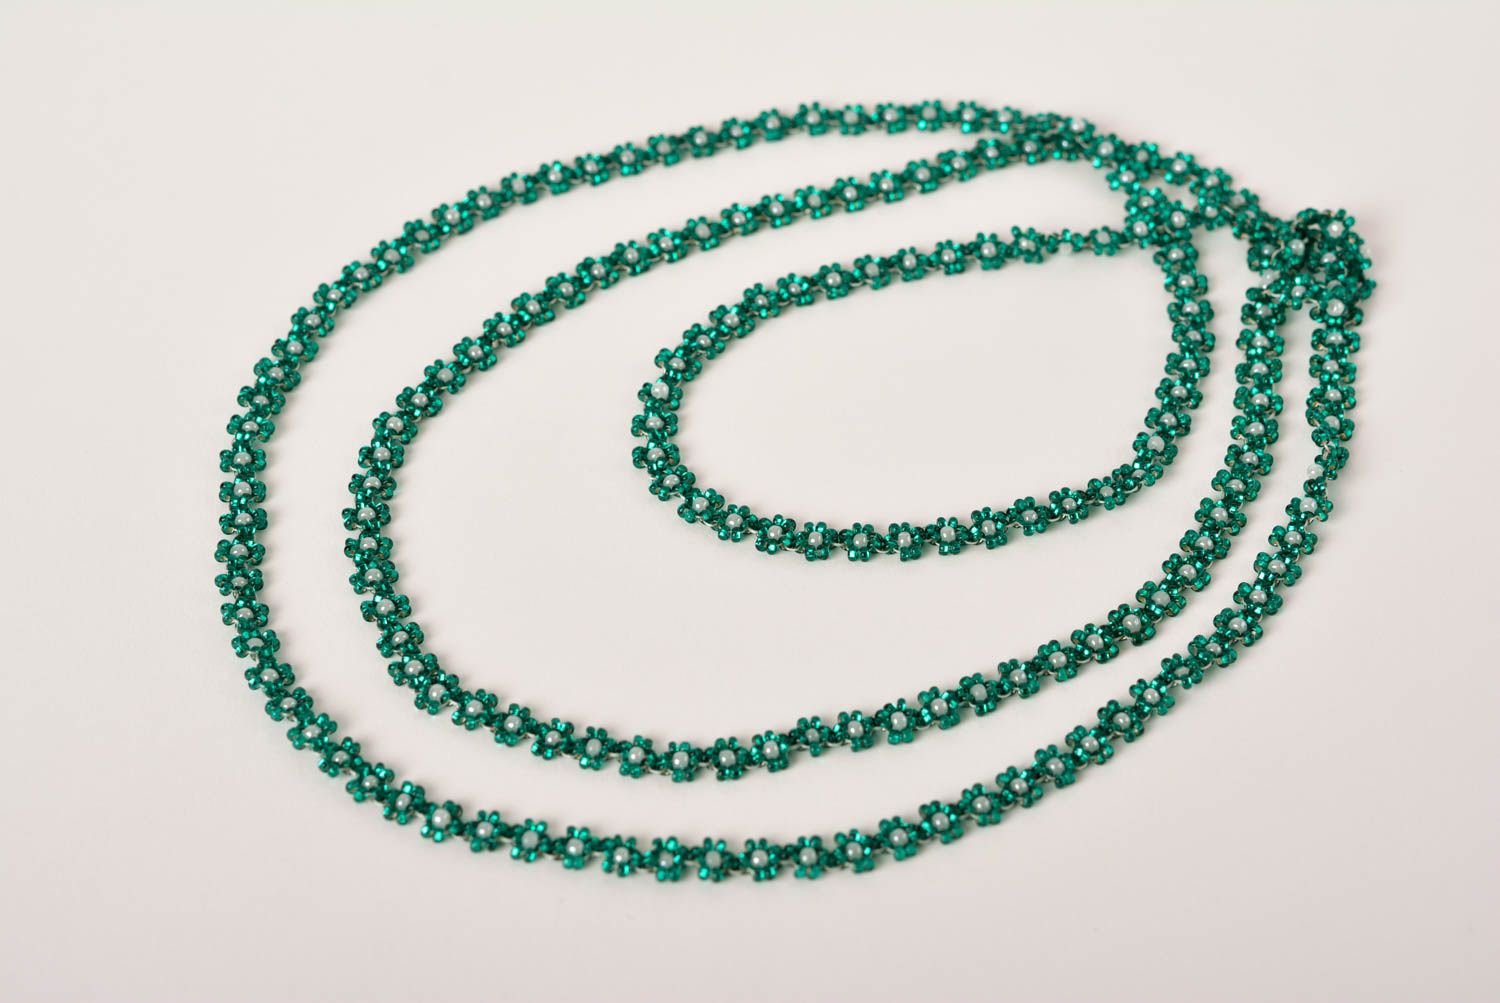 Emerald handmade beaded necklace woven bead necklace accessories for girls photo 1